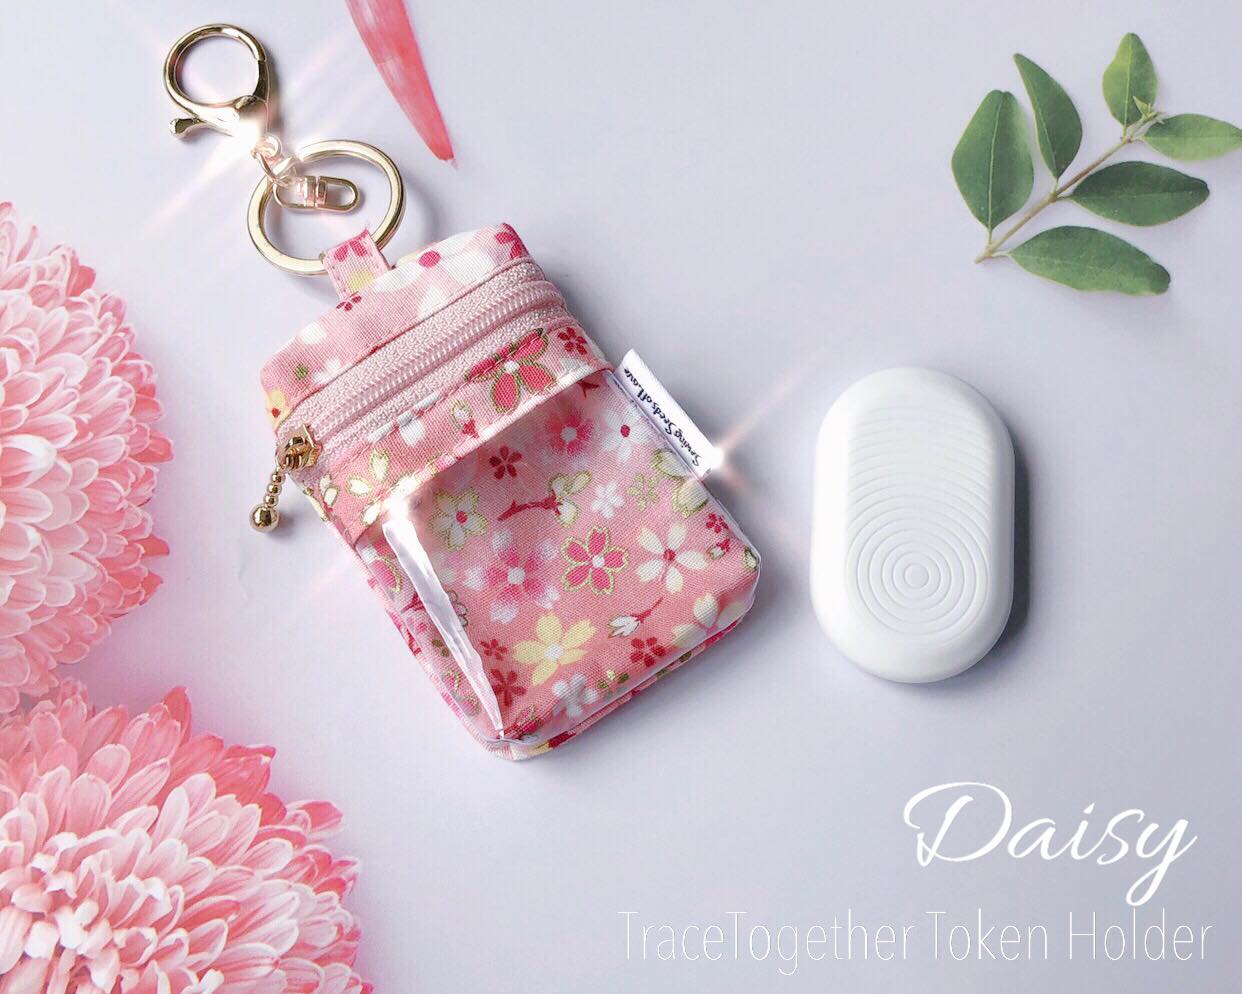 SG TraceTogether Token Holders - Daisy